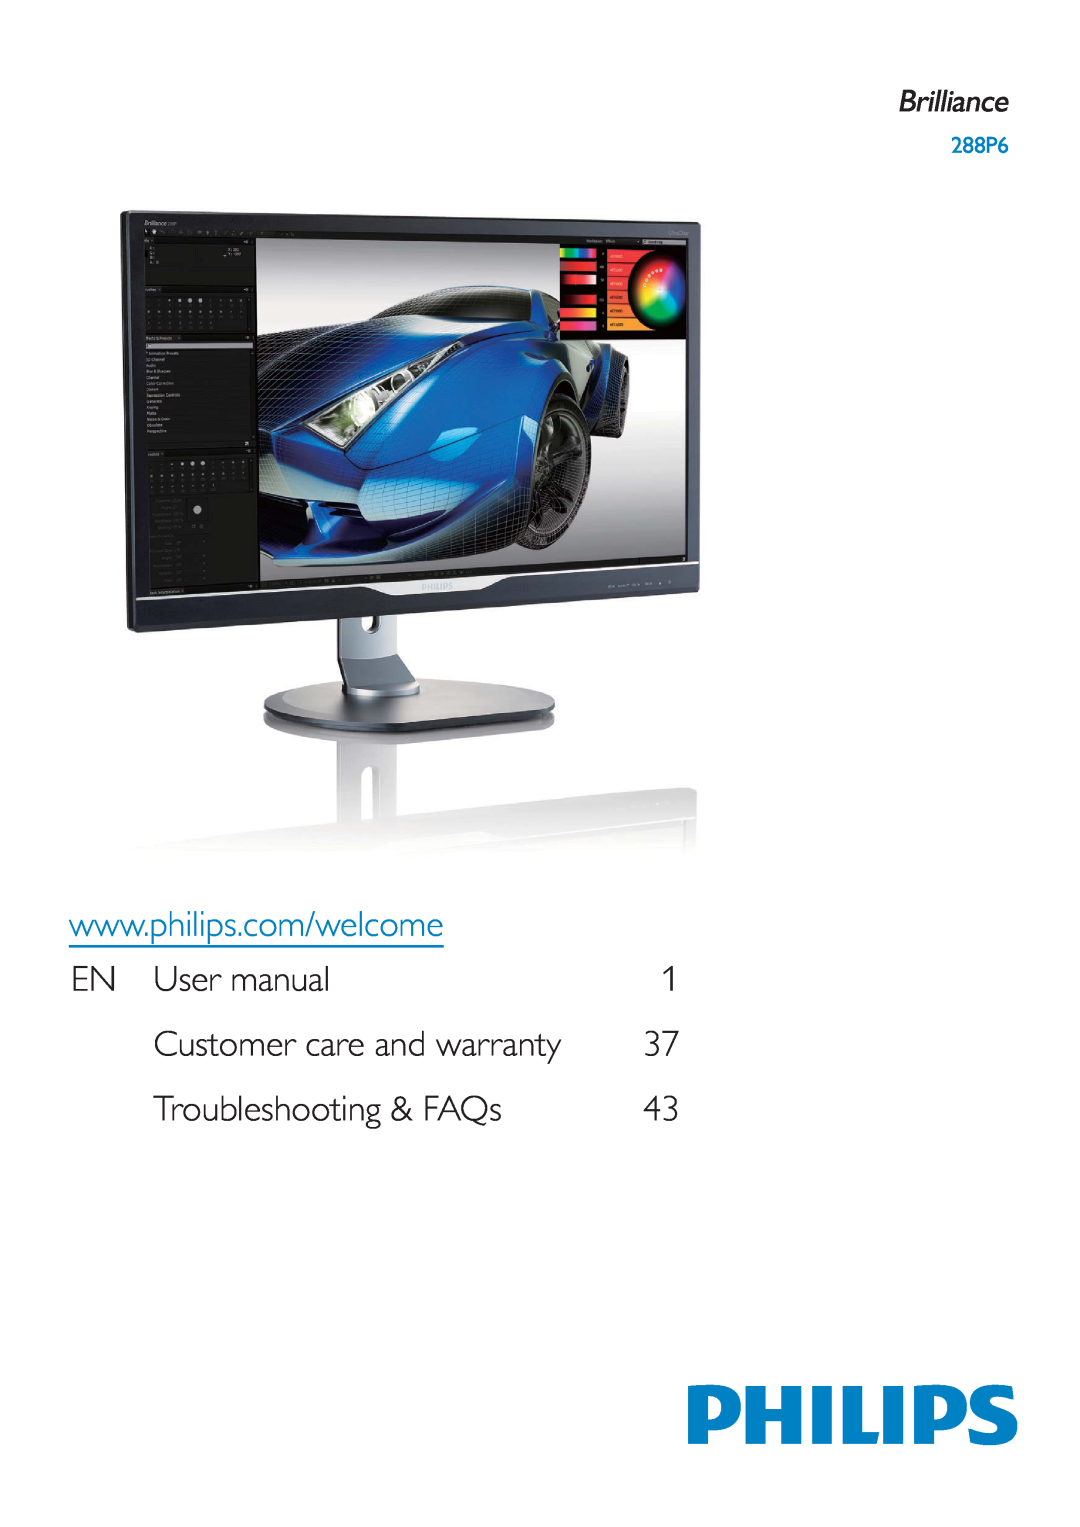 Philips 288P6LJEB user manual Customer care and warranty, Troubleshooting & FAQs 